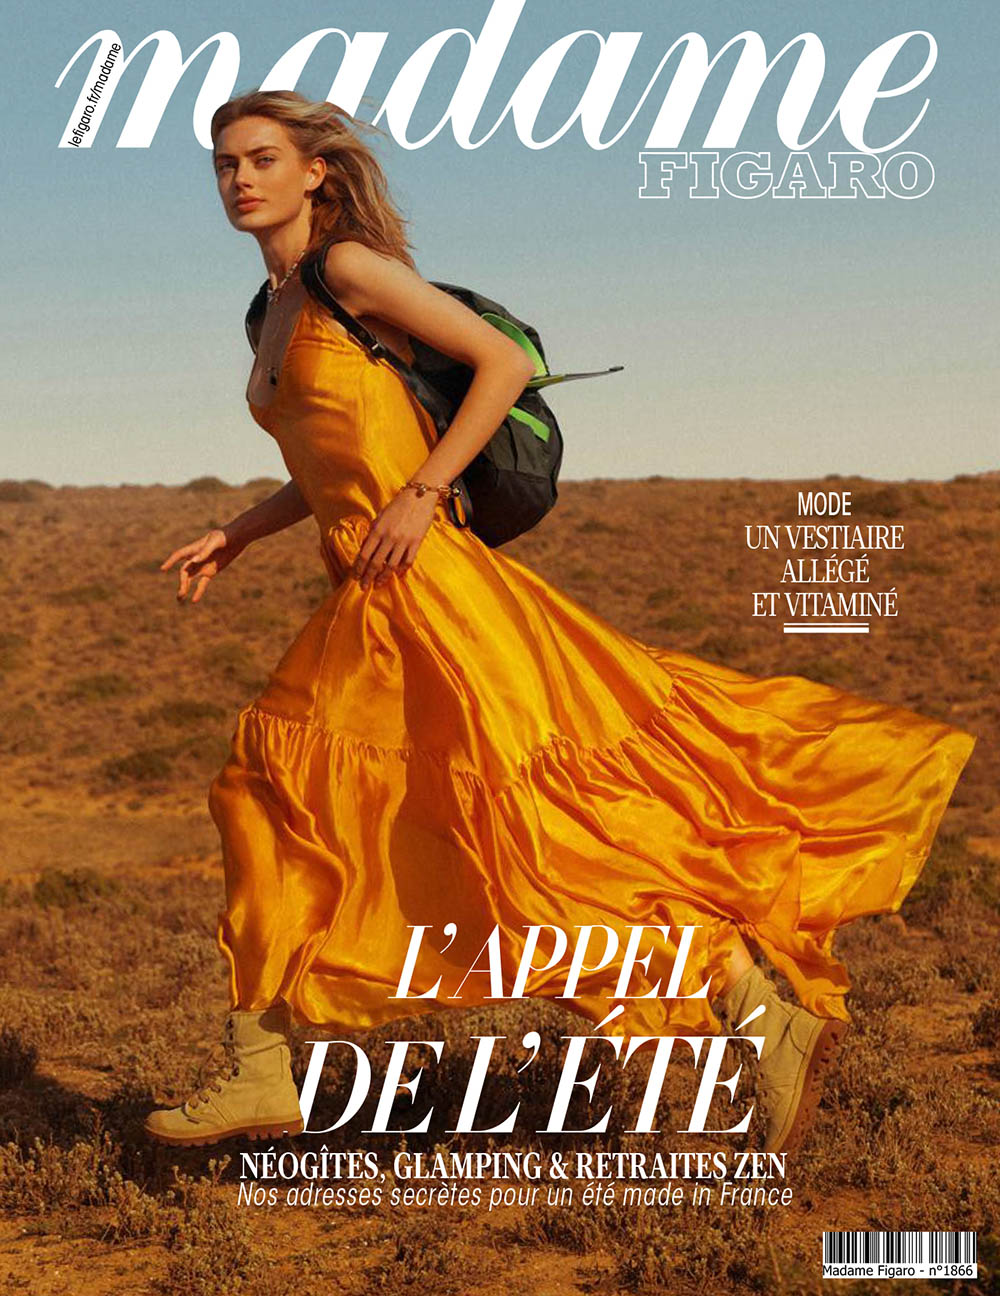 Hanna Verhees covers Madame Figaro May 29th, 2020 by Cédric Viollet